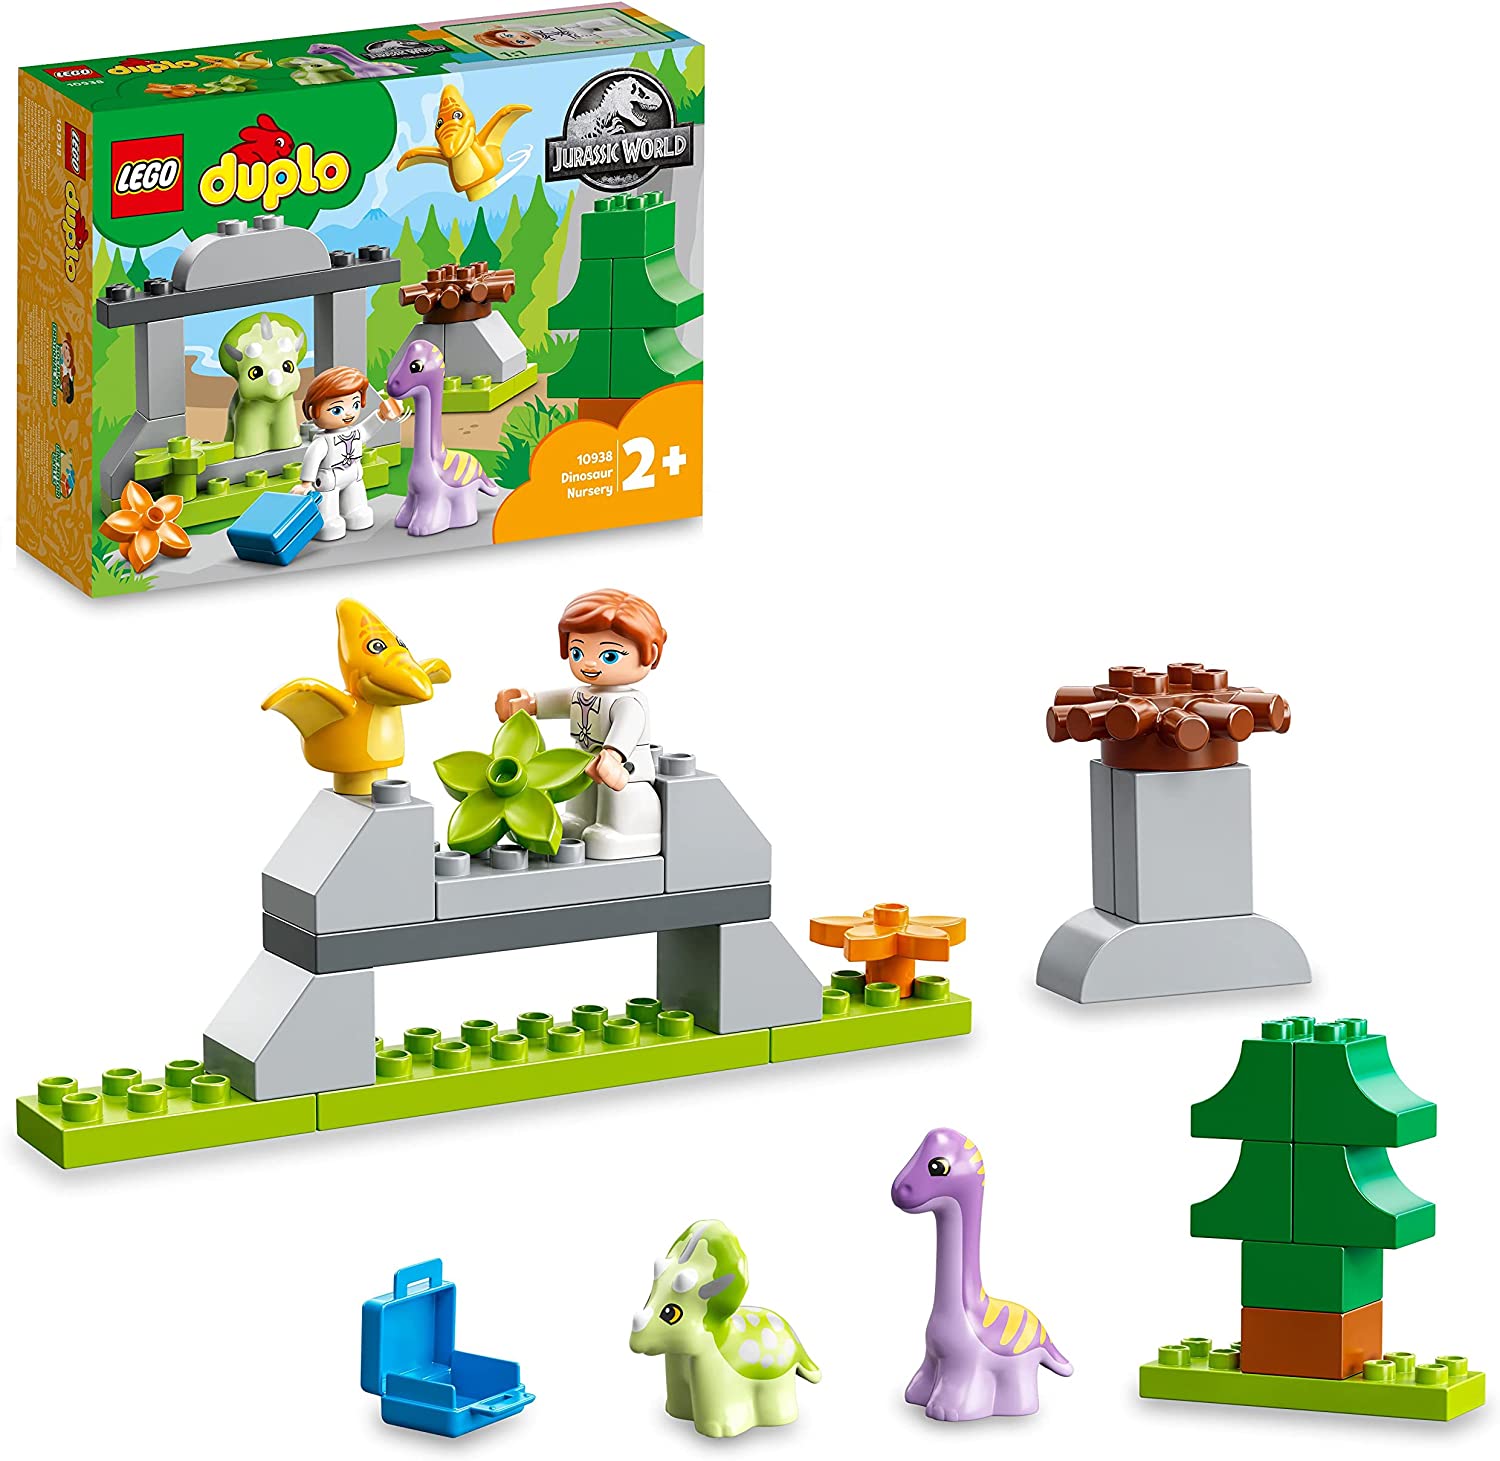 LEGO 10938 DUPLO Jurassic World Dinosaur Nursery with Baby Dino Figures and Triceratops, Toy for Toddlers from 2 Years